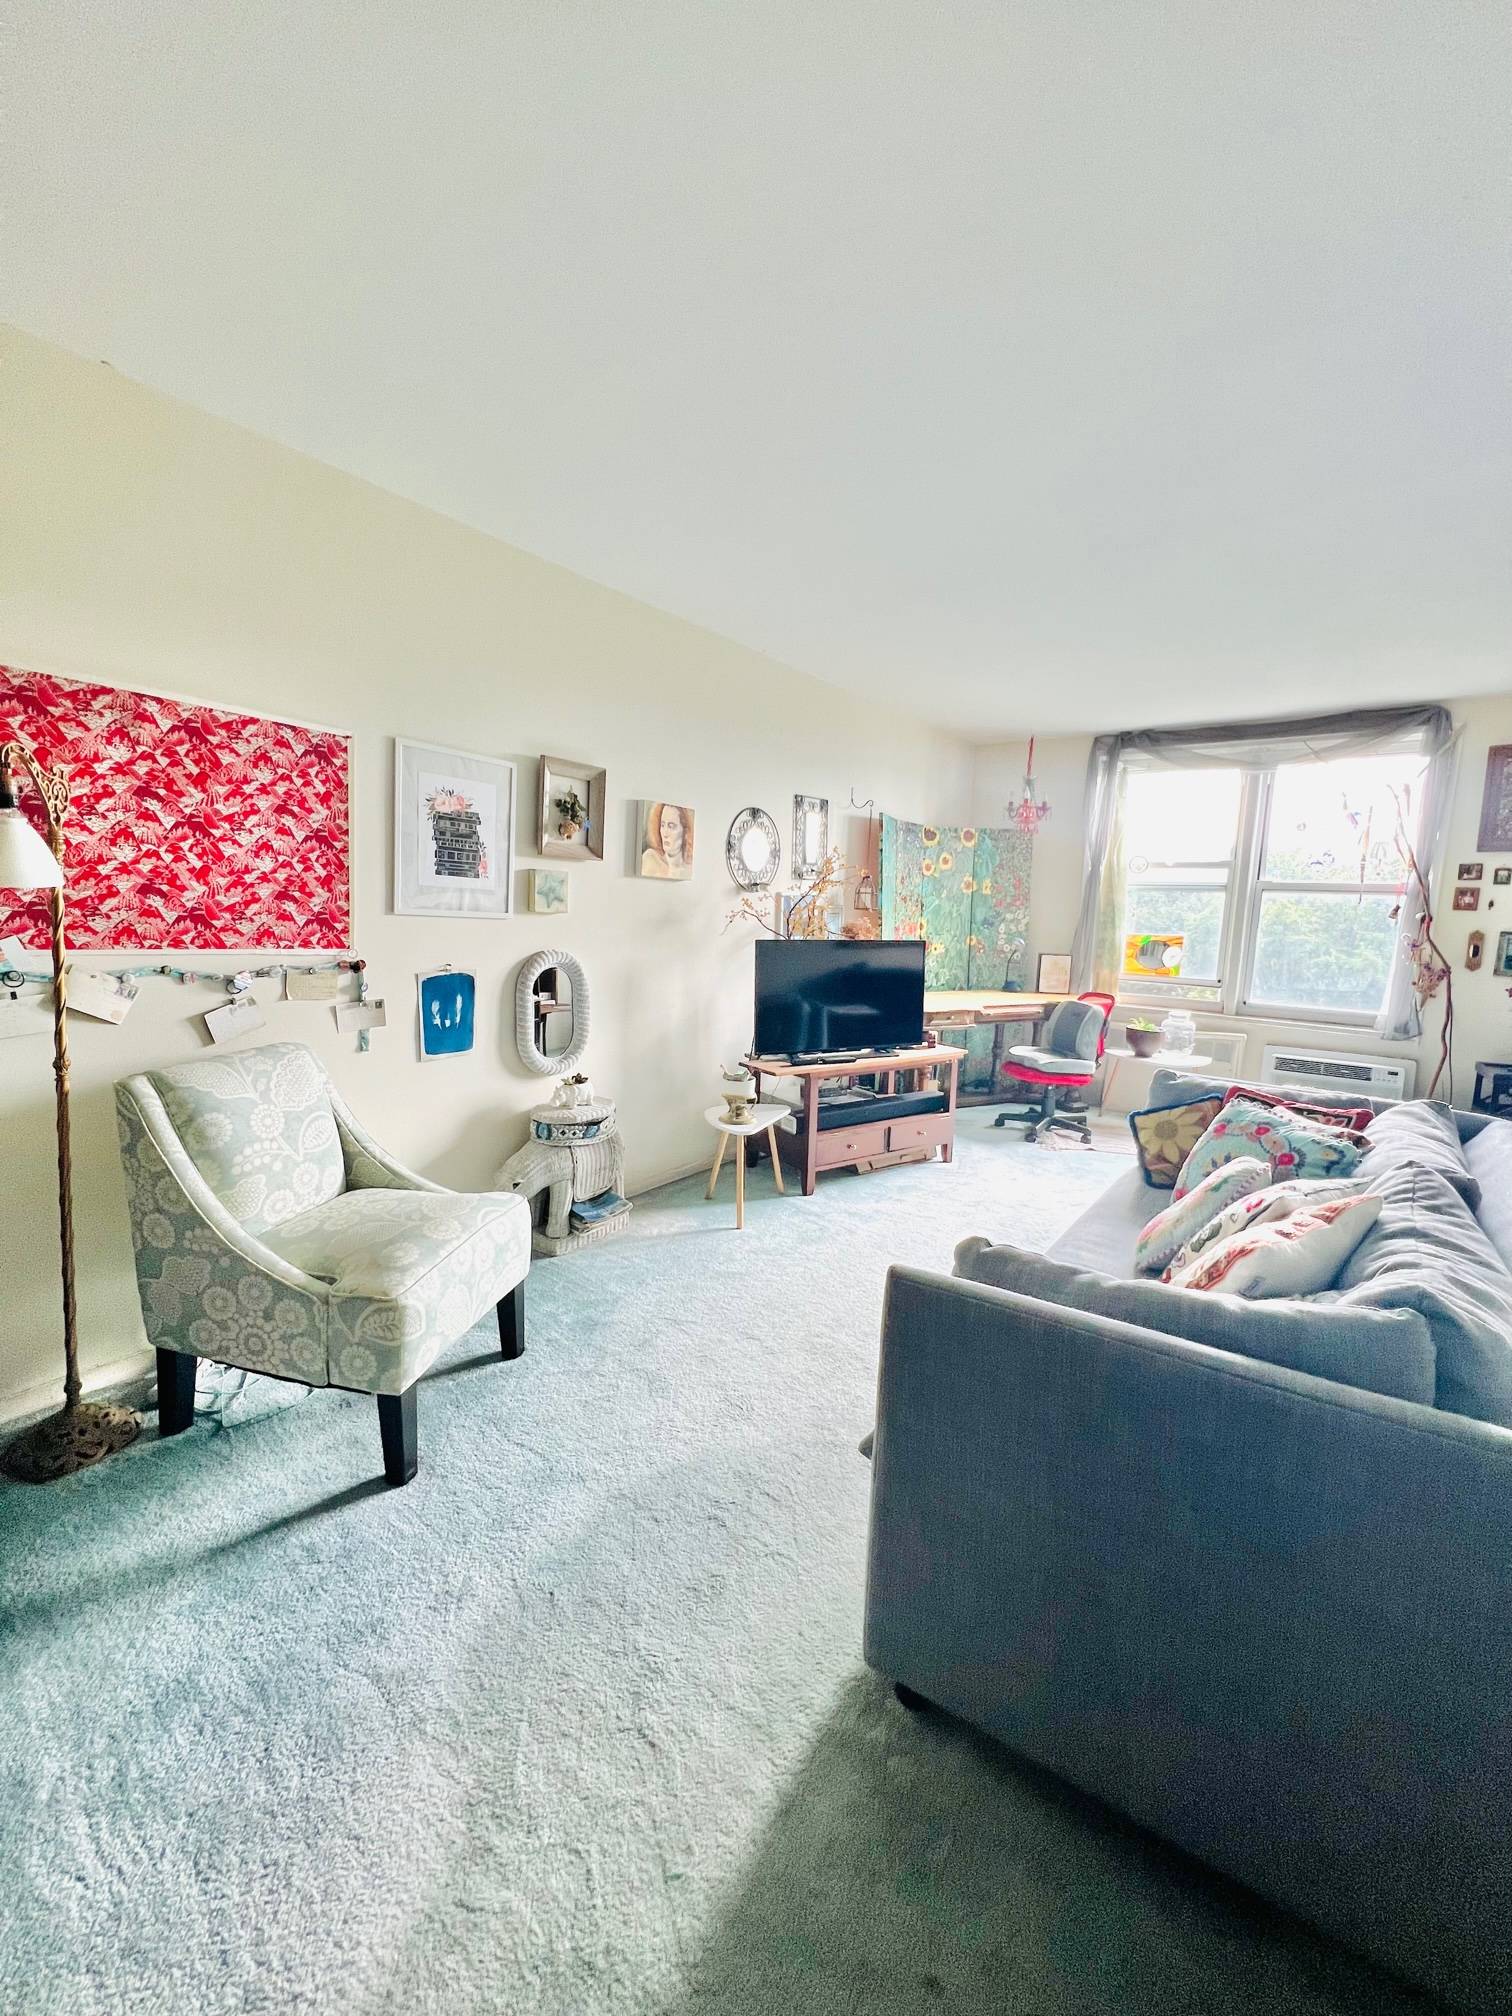 Gorgeous Spacious Oversized One Bedroom Fully Renovated Home Office - Forest Hills/Rego Park - Excellent Location